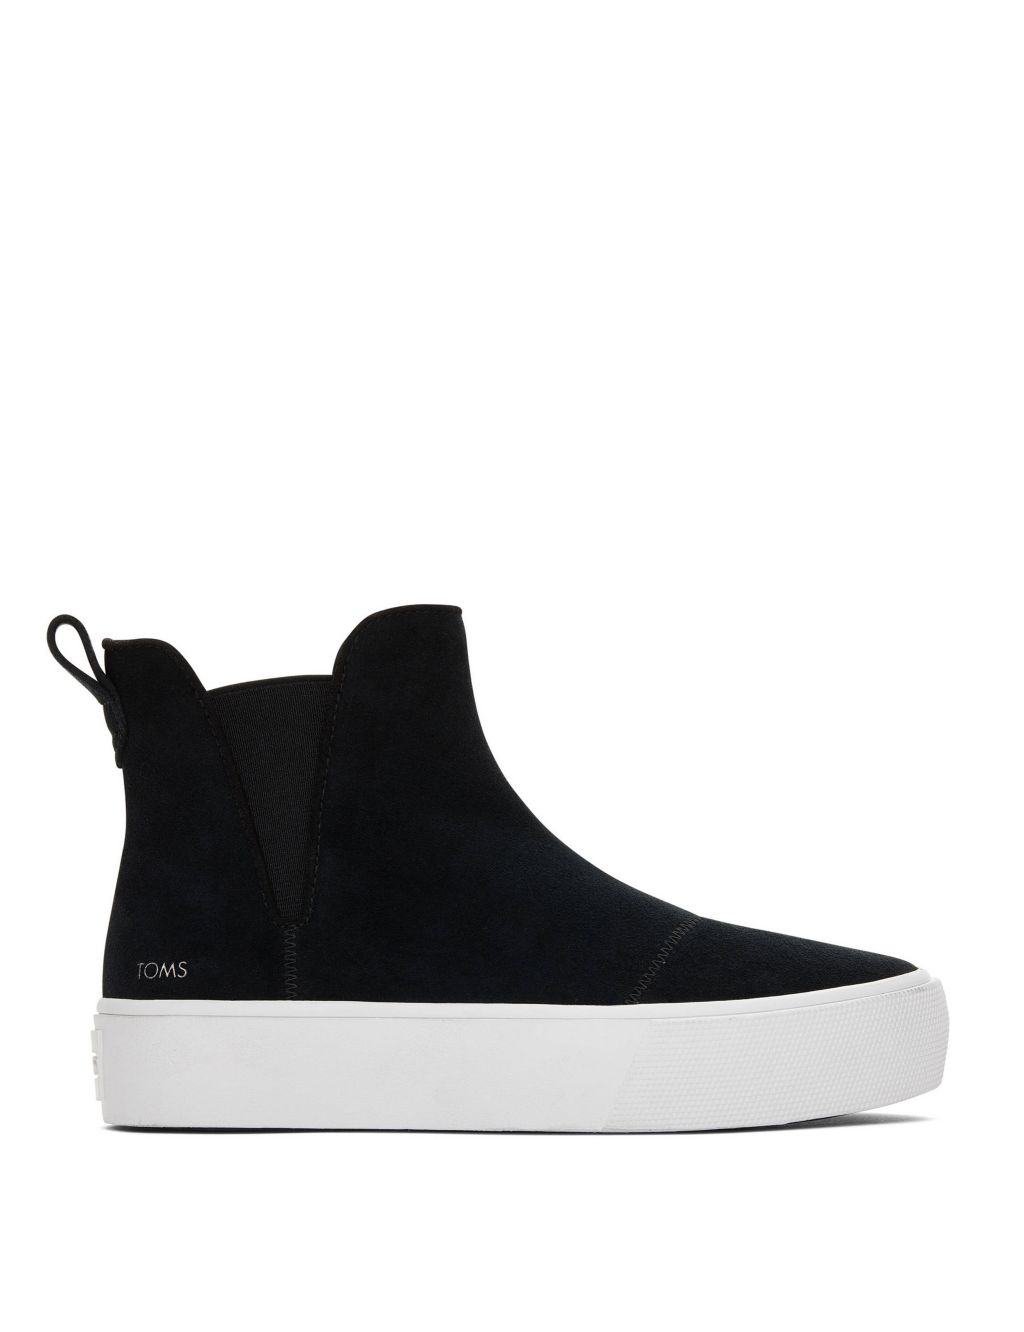 Leather Platform High Top Trainers image 1